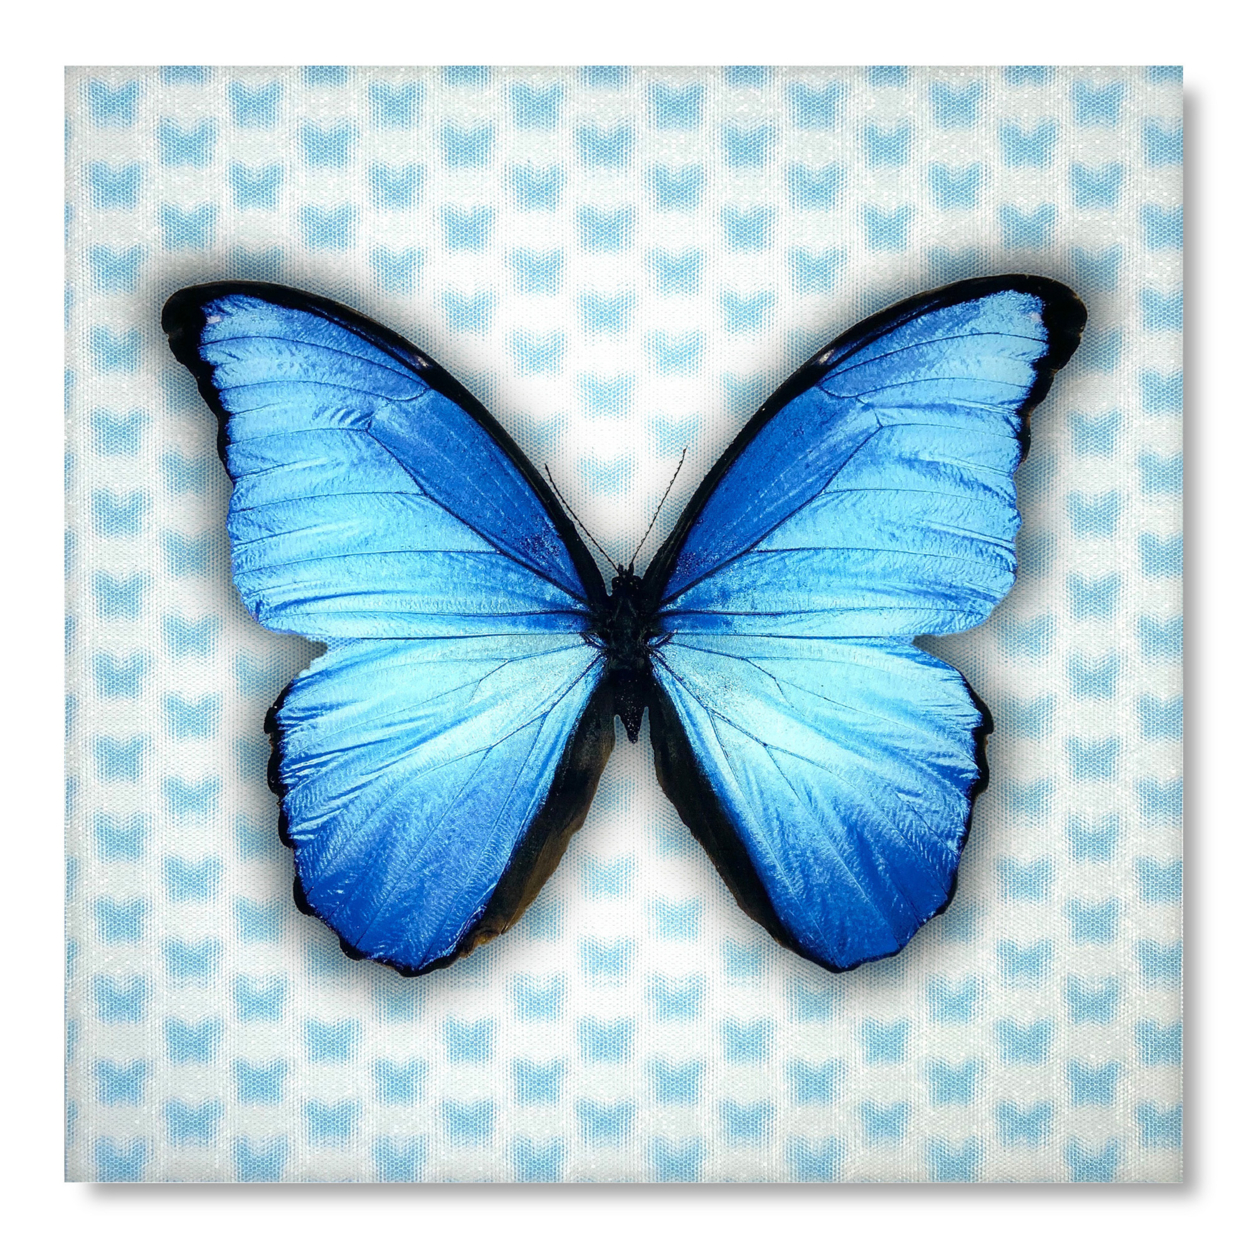 Multi-Dimensional 5D Blue Butterfly Wall Art Print On Strong Polycarbonate Panel W Vibrant Colors - Lenticular Artwork By Matashi (12x12 In)